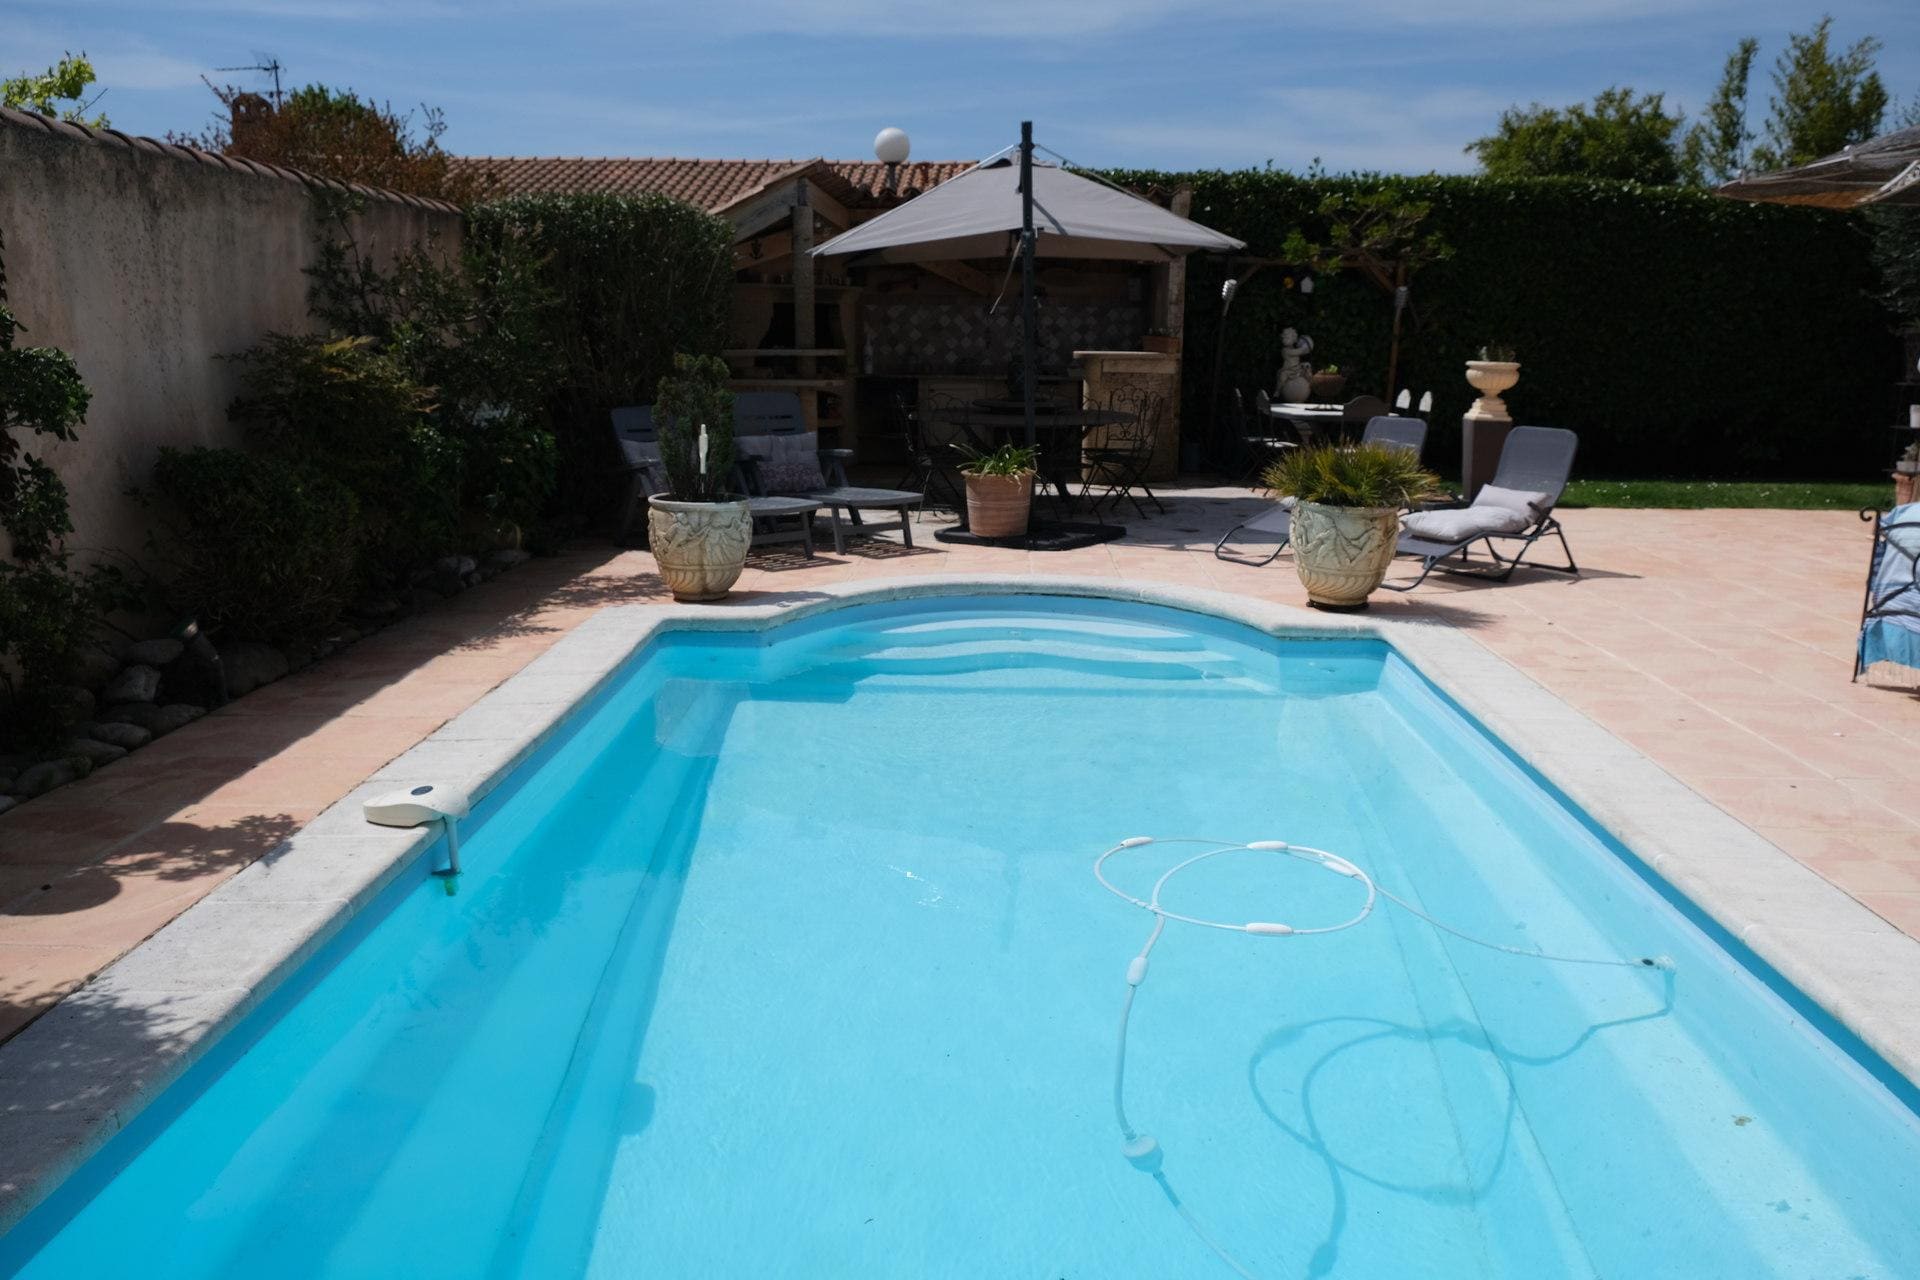 pleasant home with private pool and pool house - close to aix en provence, accommodates 4 people.